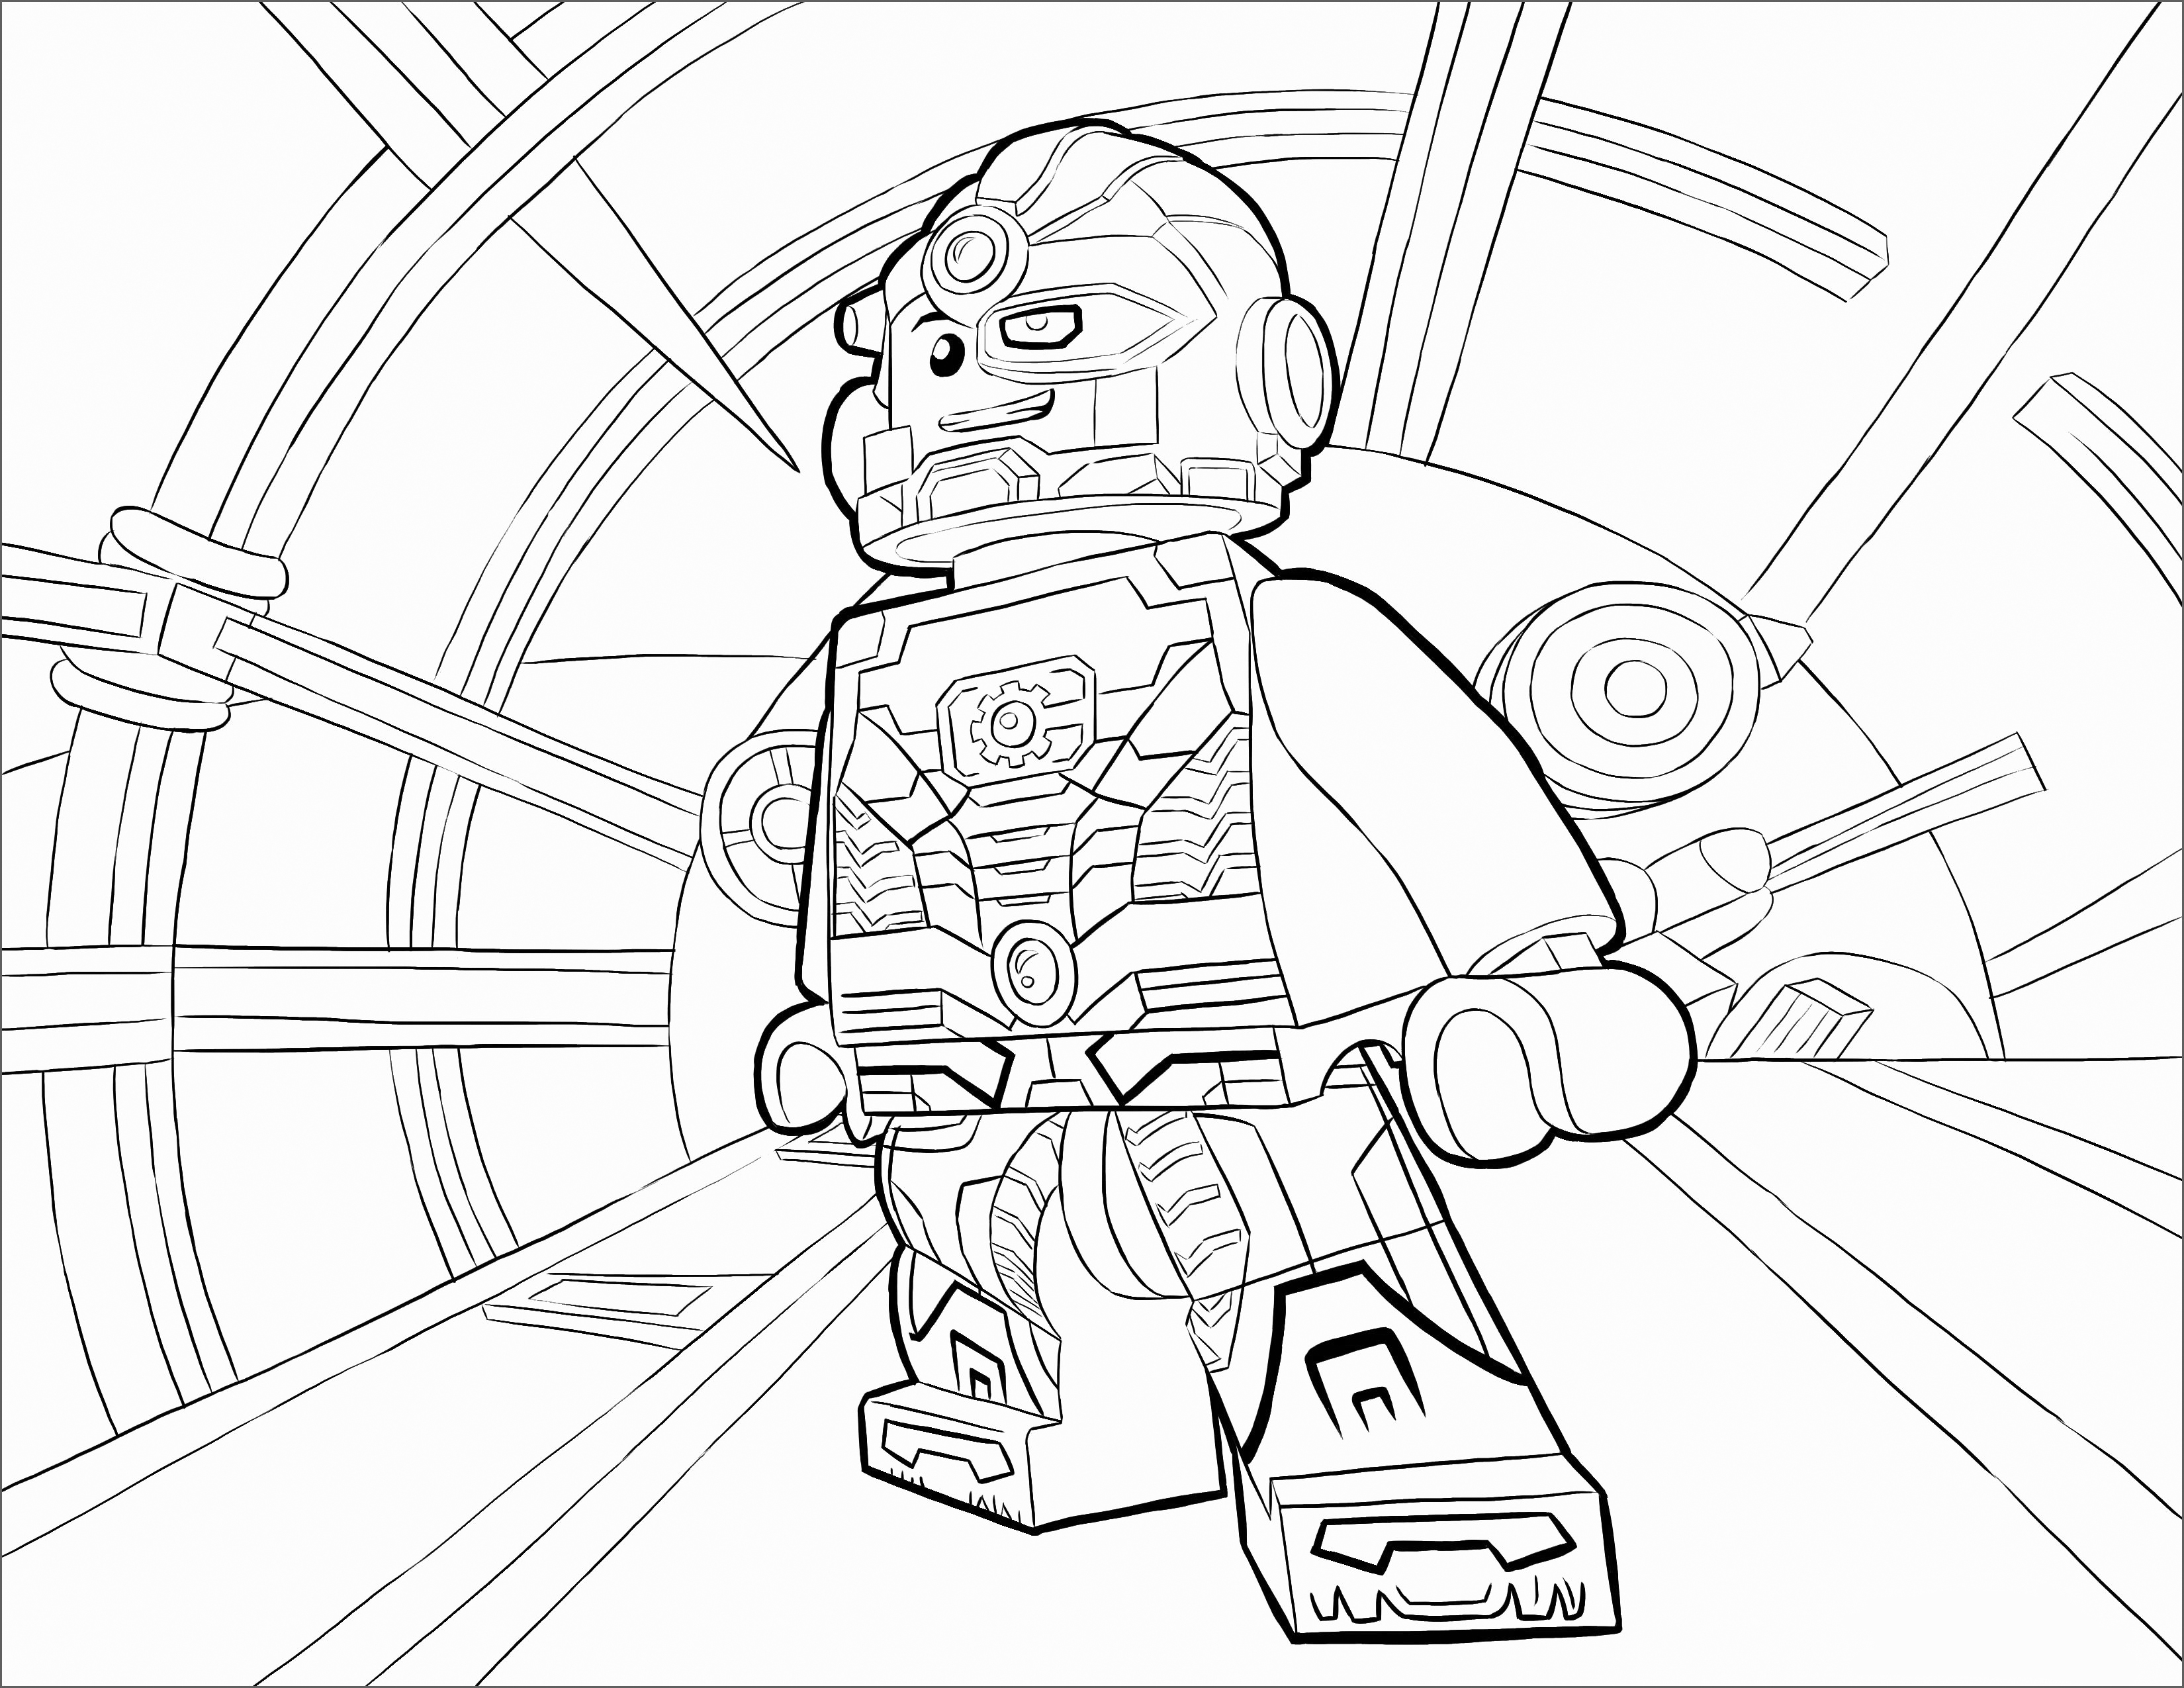 Lego superhero coloring pages